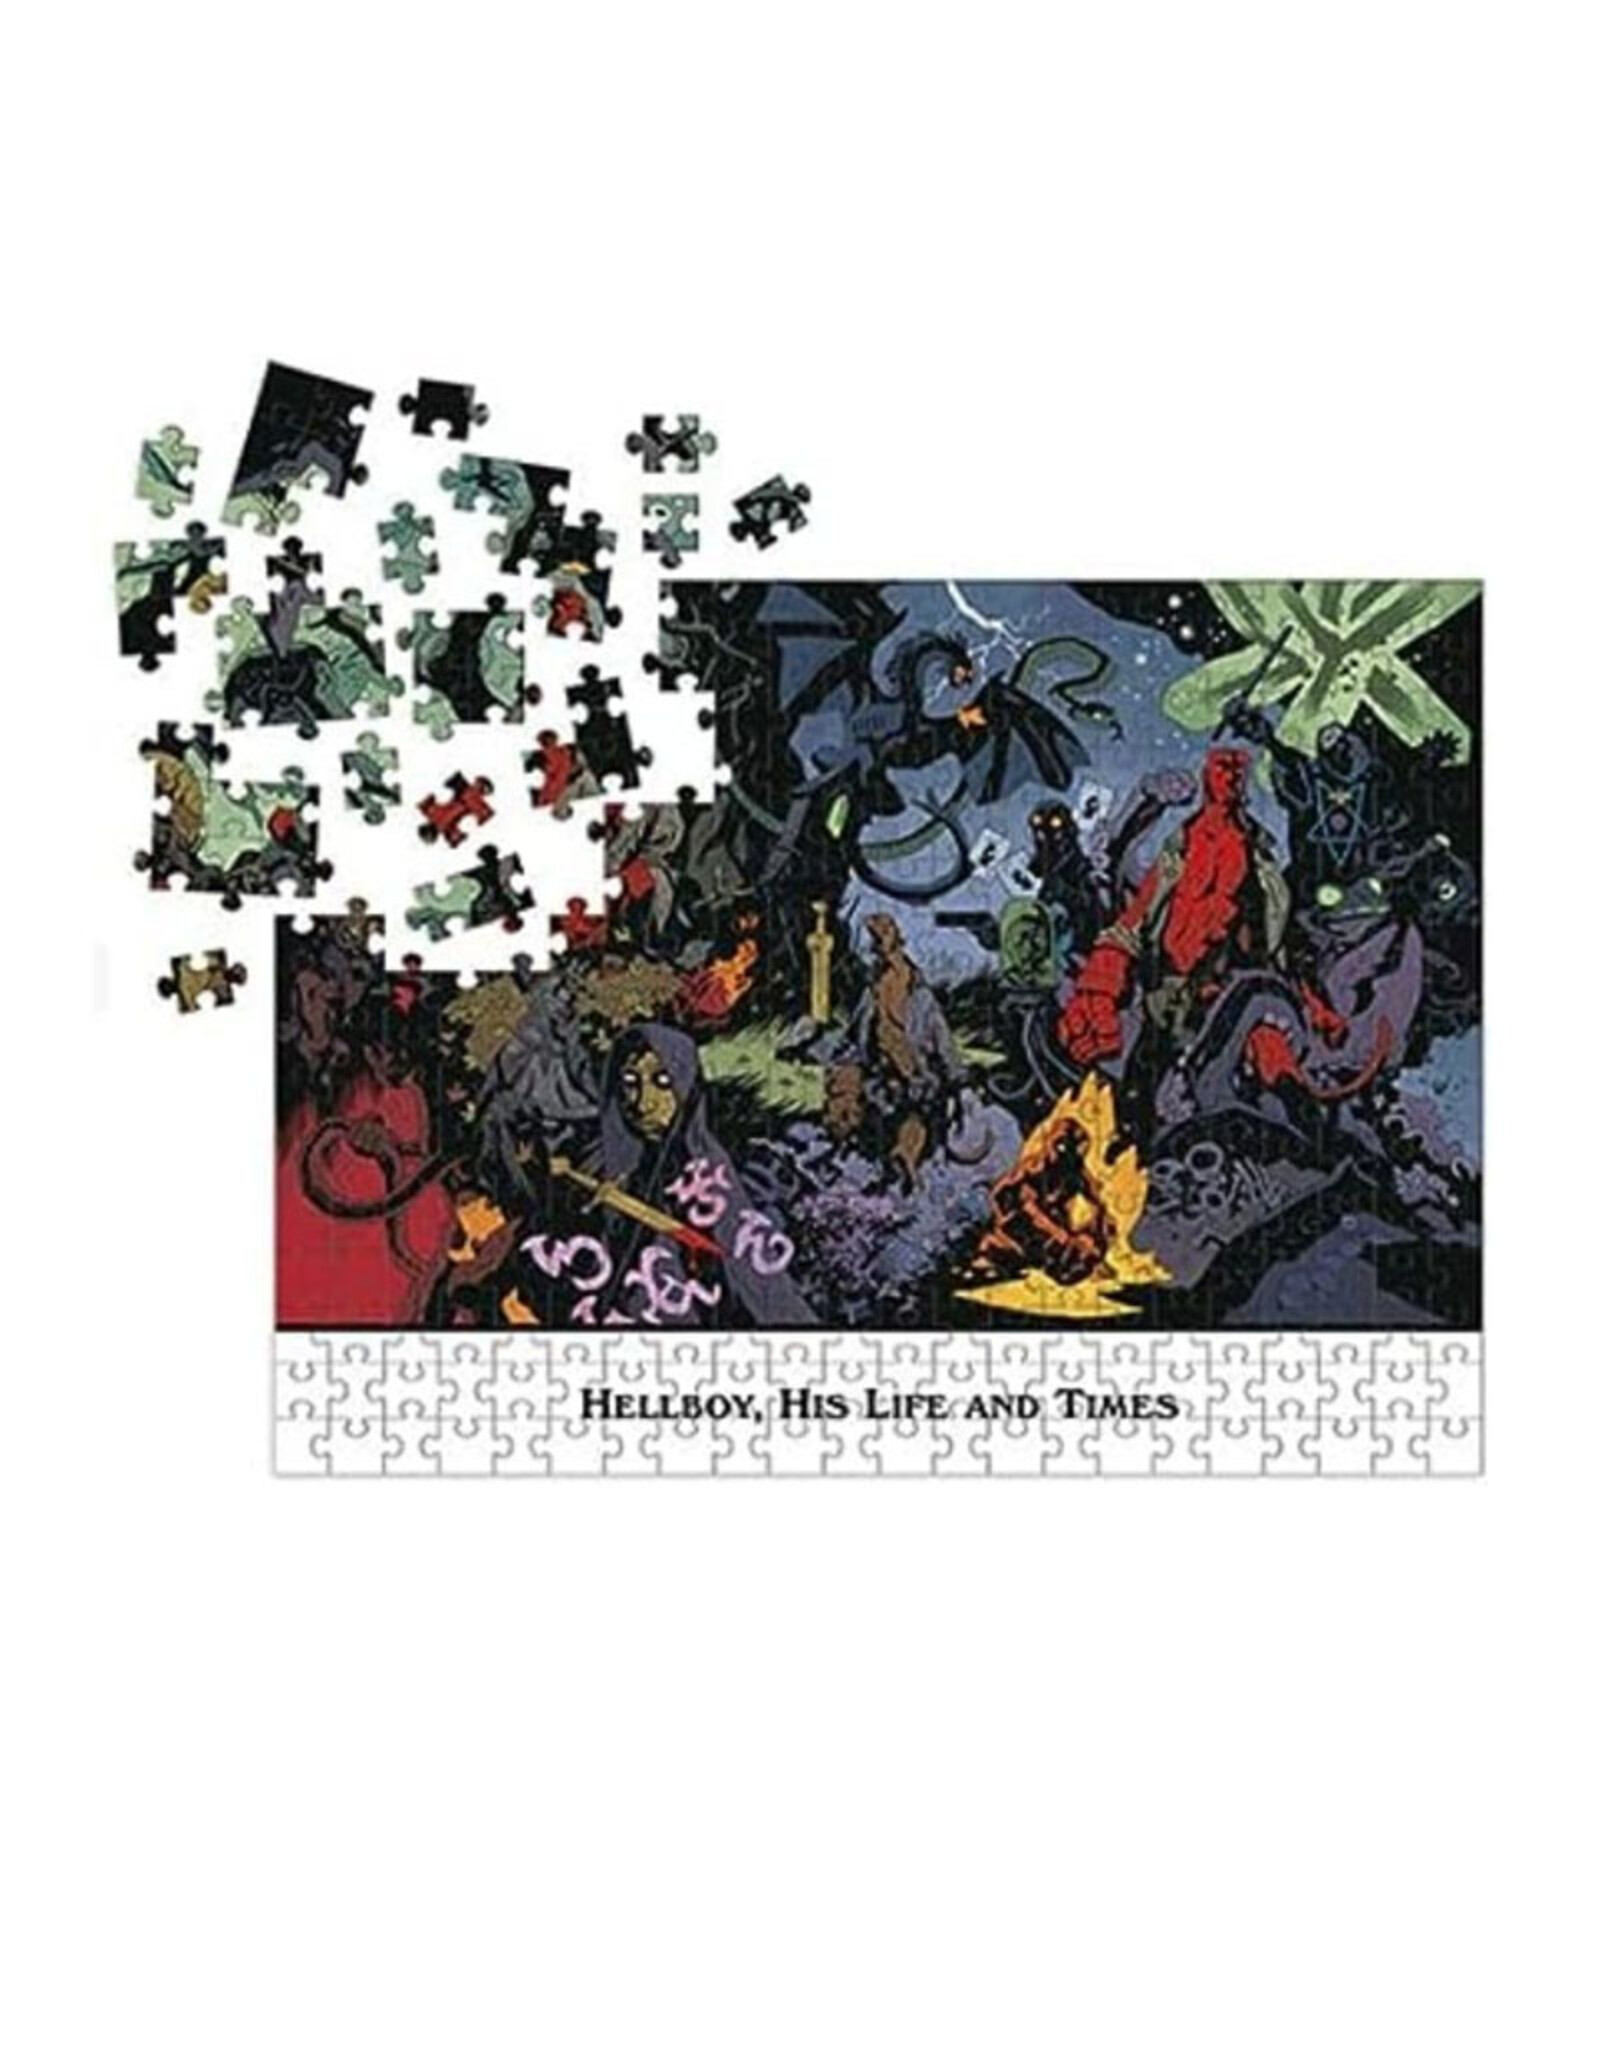 Dark Horse Comics Hellboy: His Life and Times 1,000 Piece Puzzle